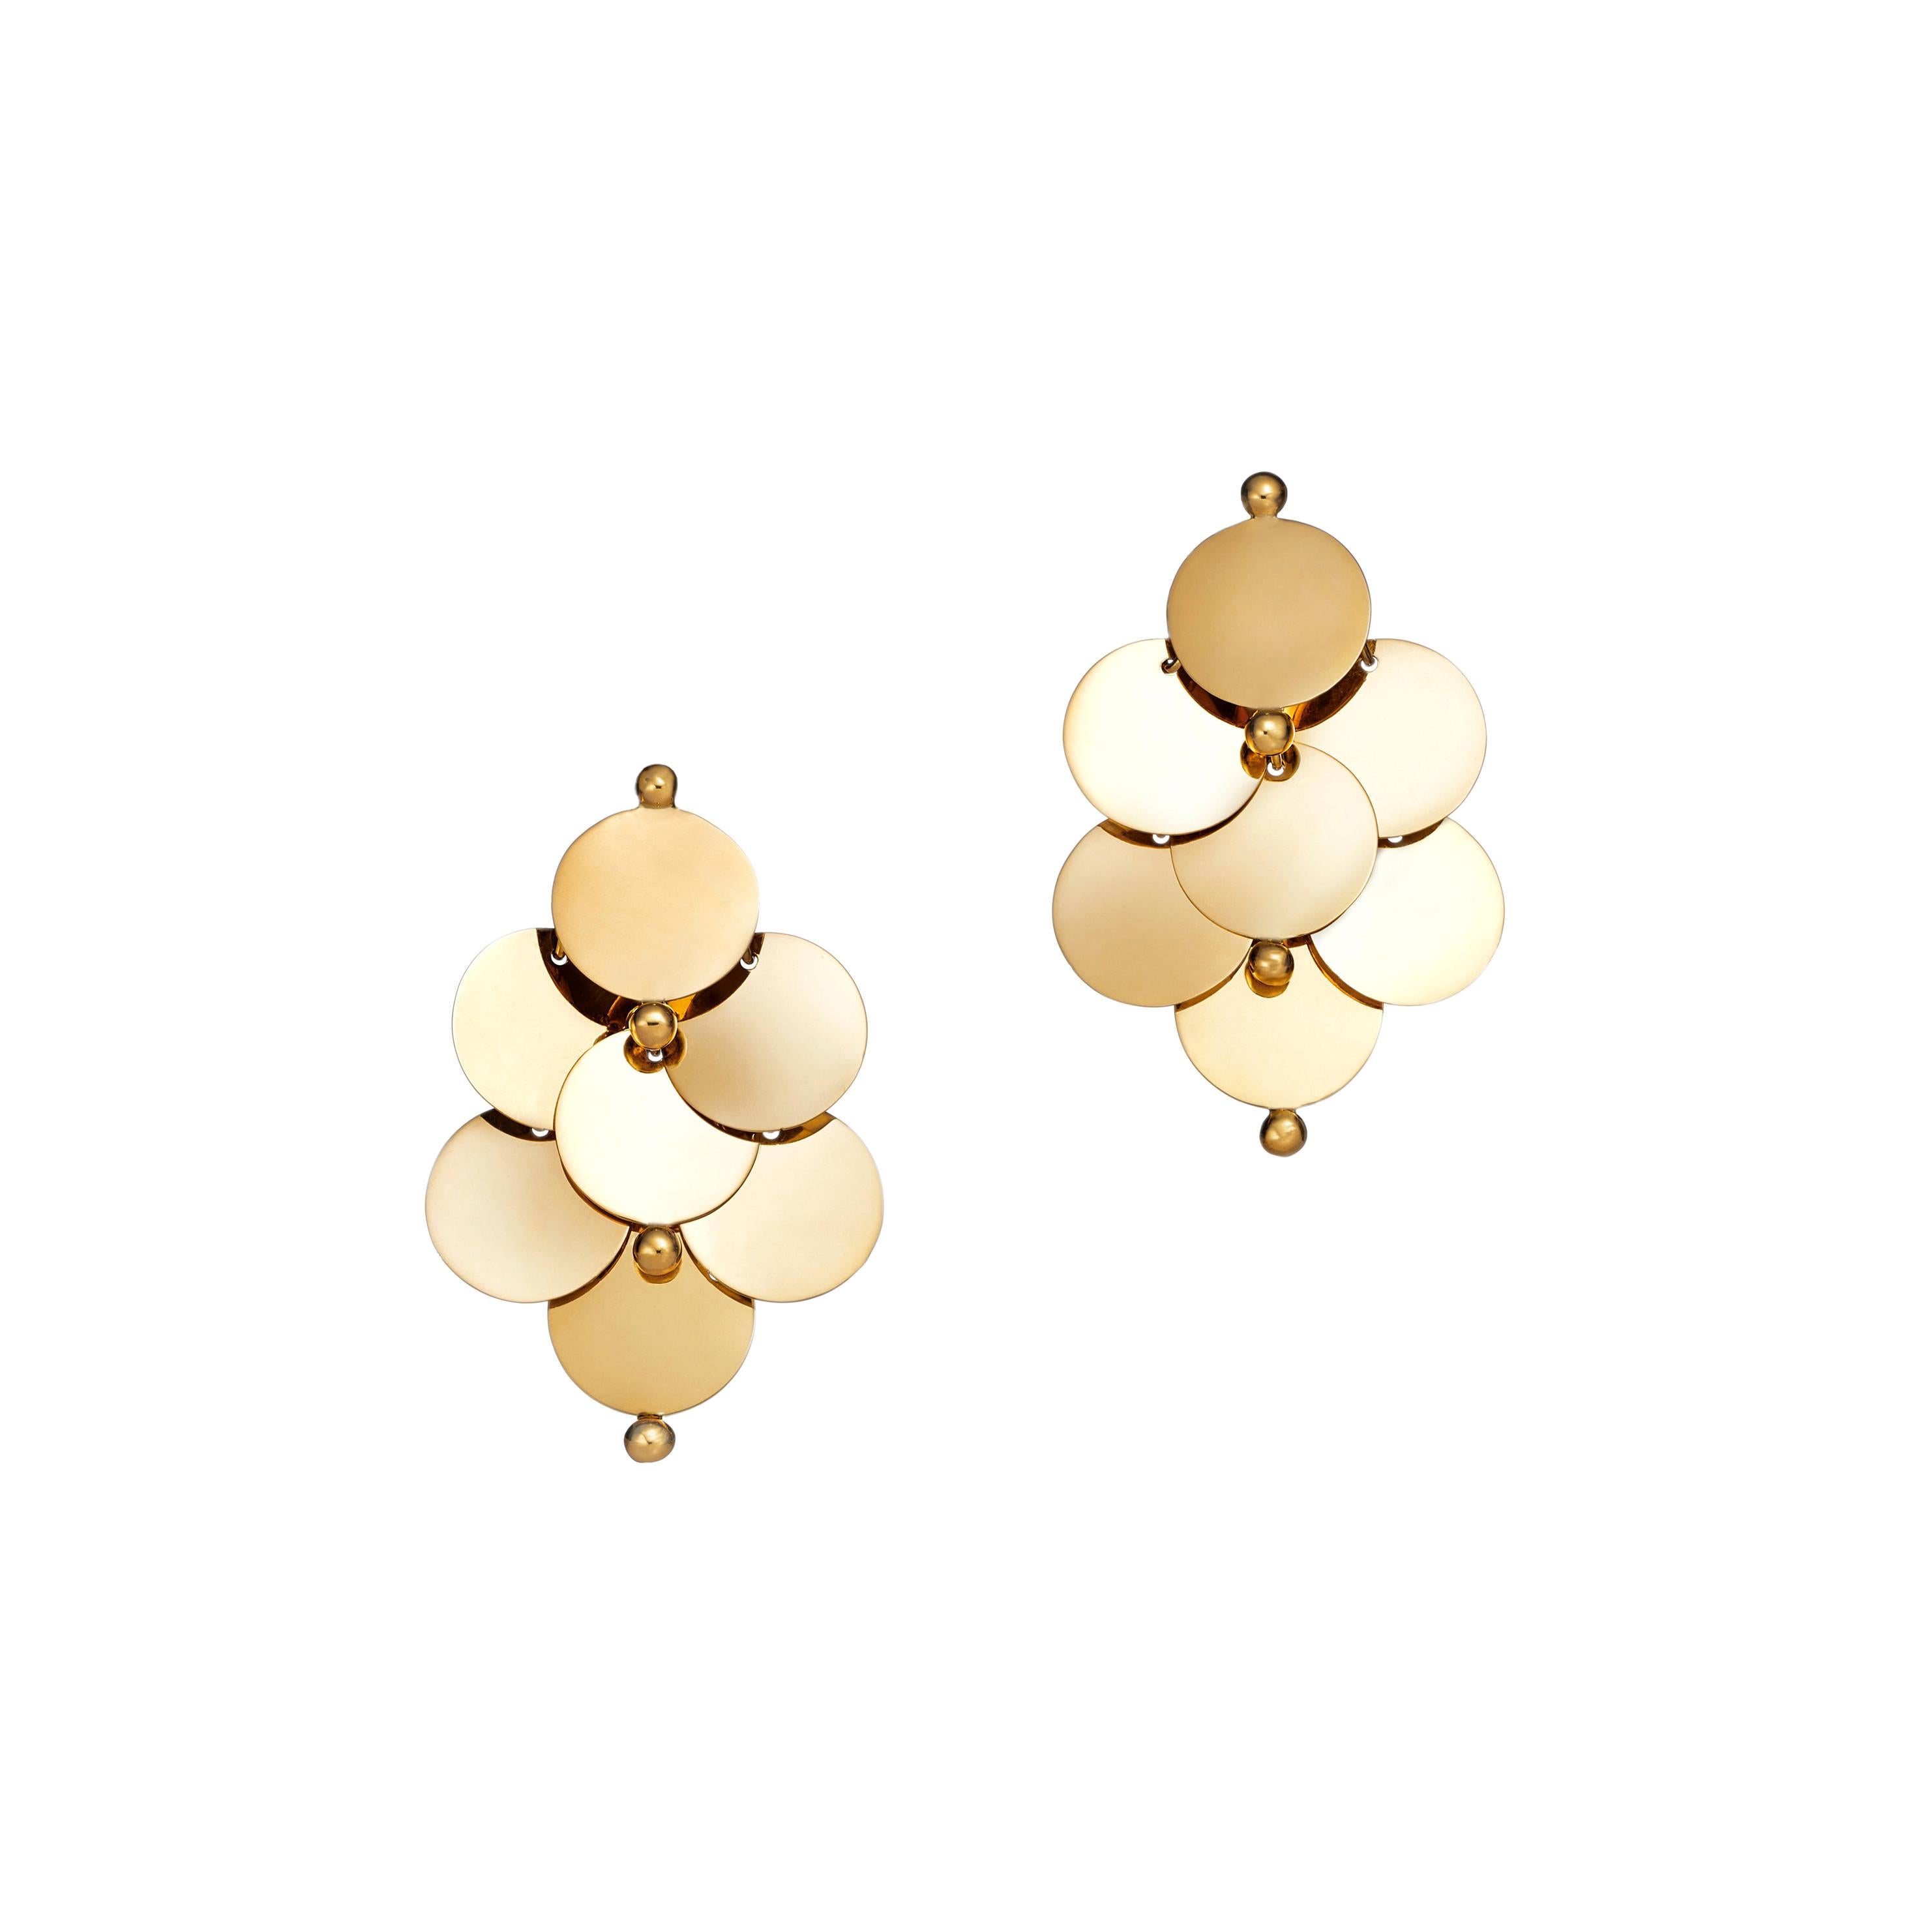 18kt Fairmined Ecological Yellow Gold William Spratling Dancing Disc Earrings For Sale